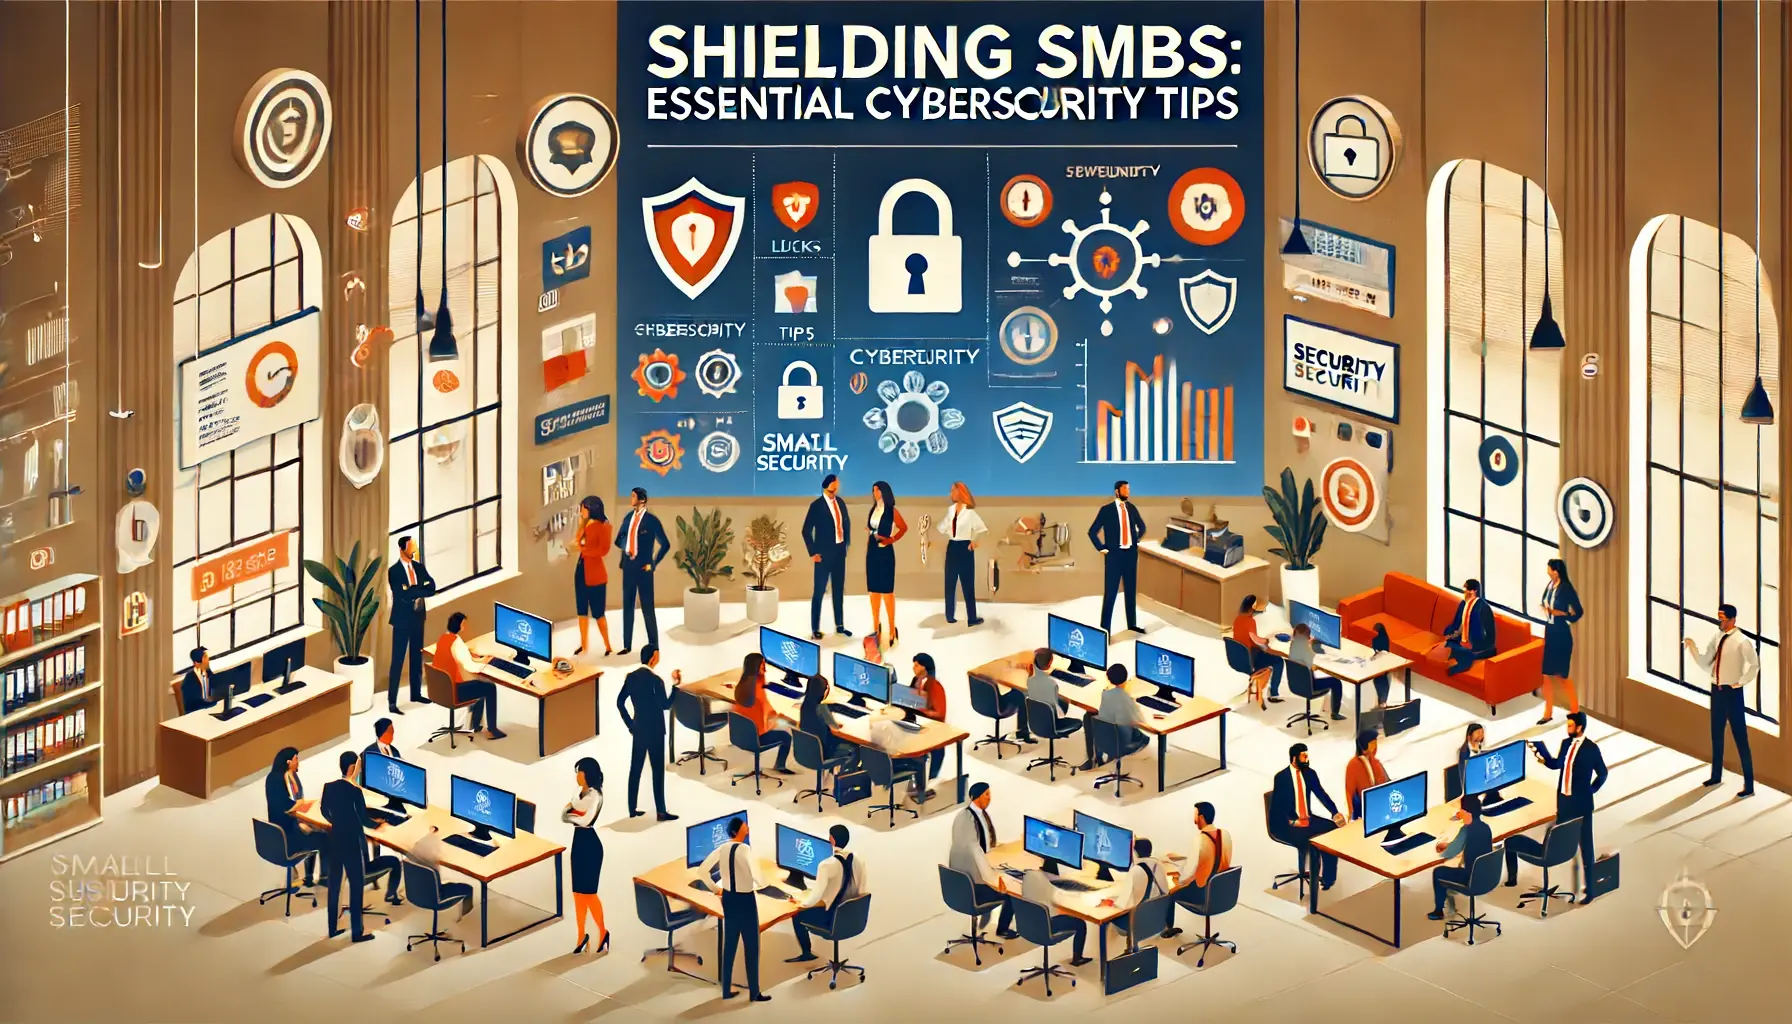 Shielding SMBs: Essential Cybersecurity Tips